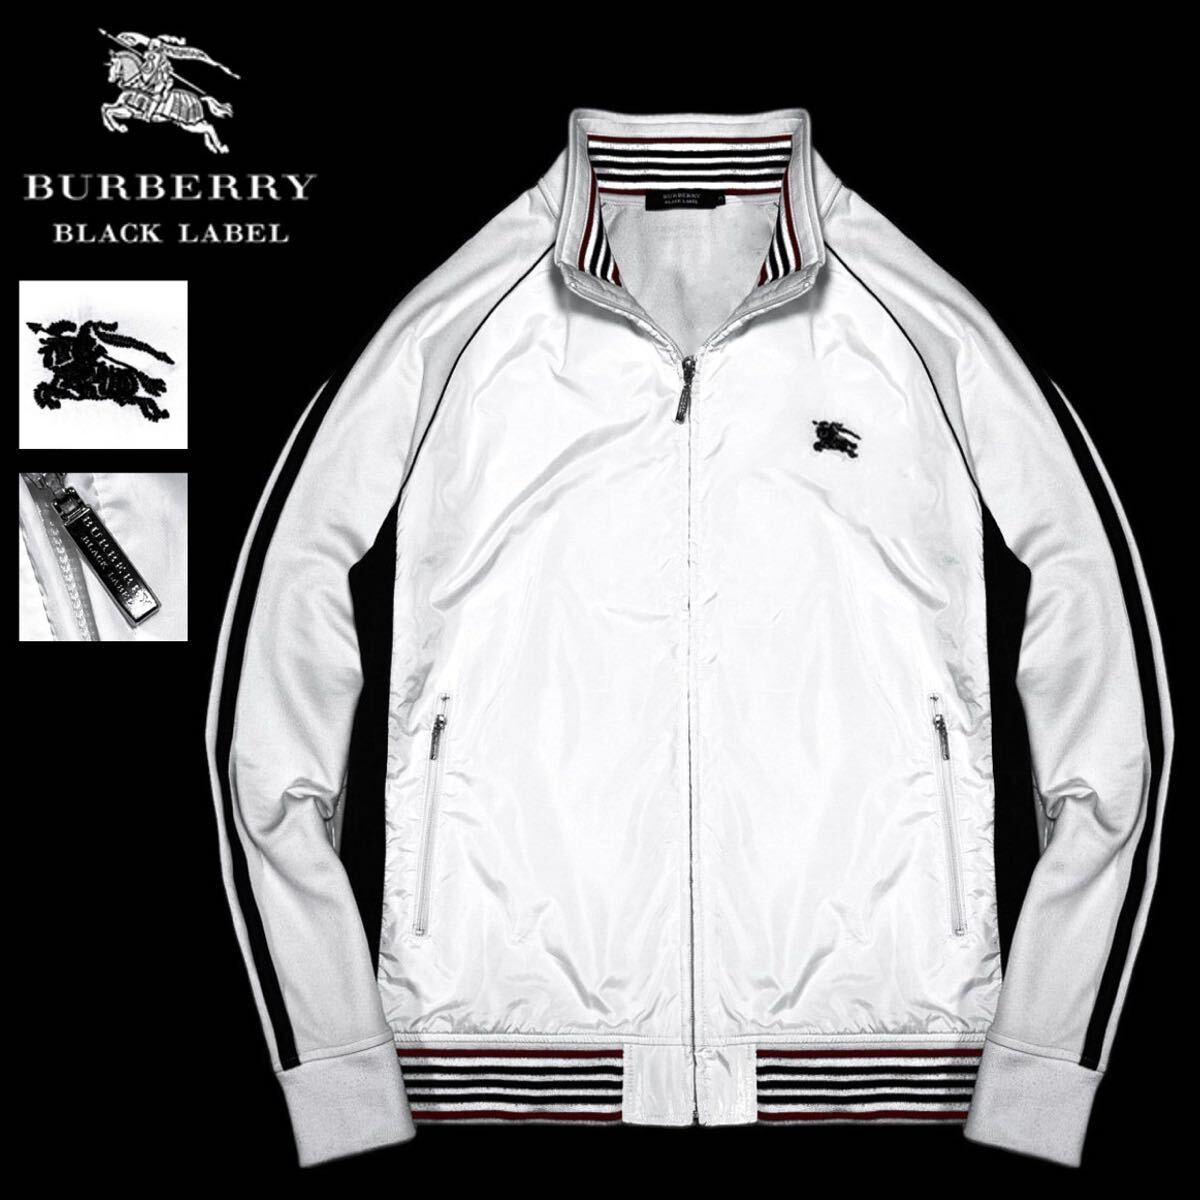  beautiful goods Burberry Black Label hose embroidery noba border sleeve line jersey 3/L white jersey blouson BURBERRY BLACK LABEL